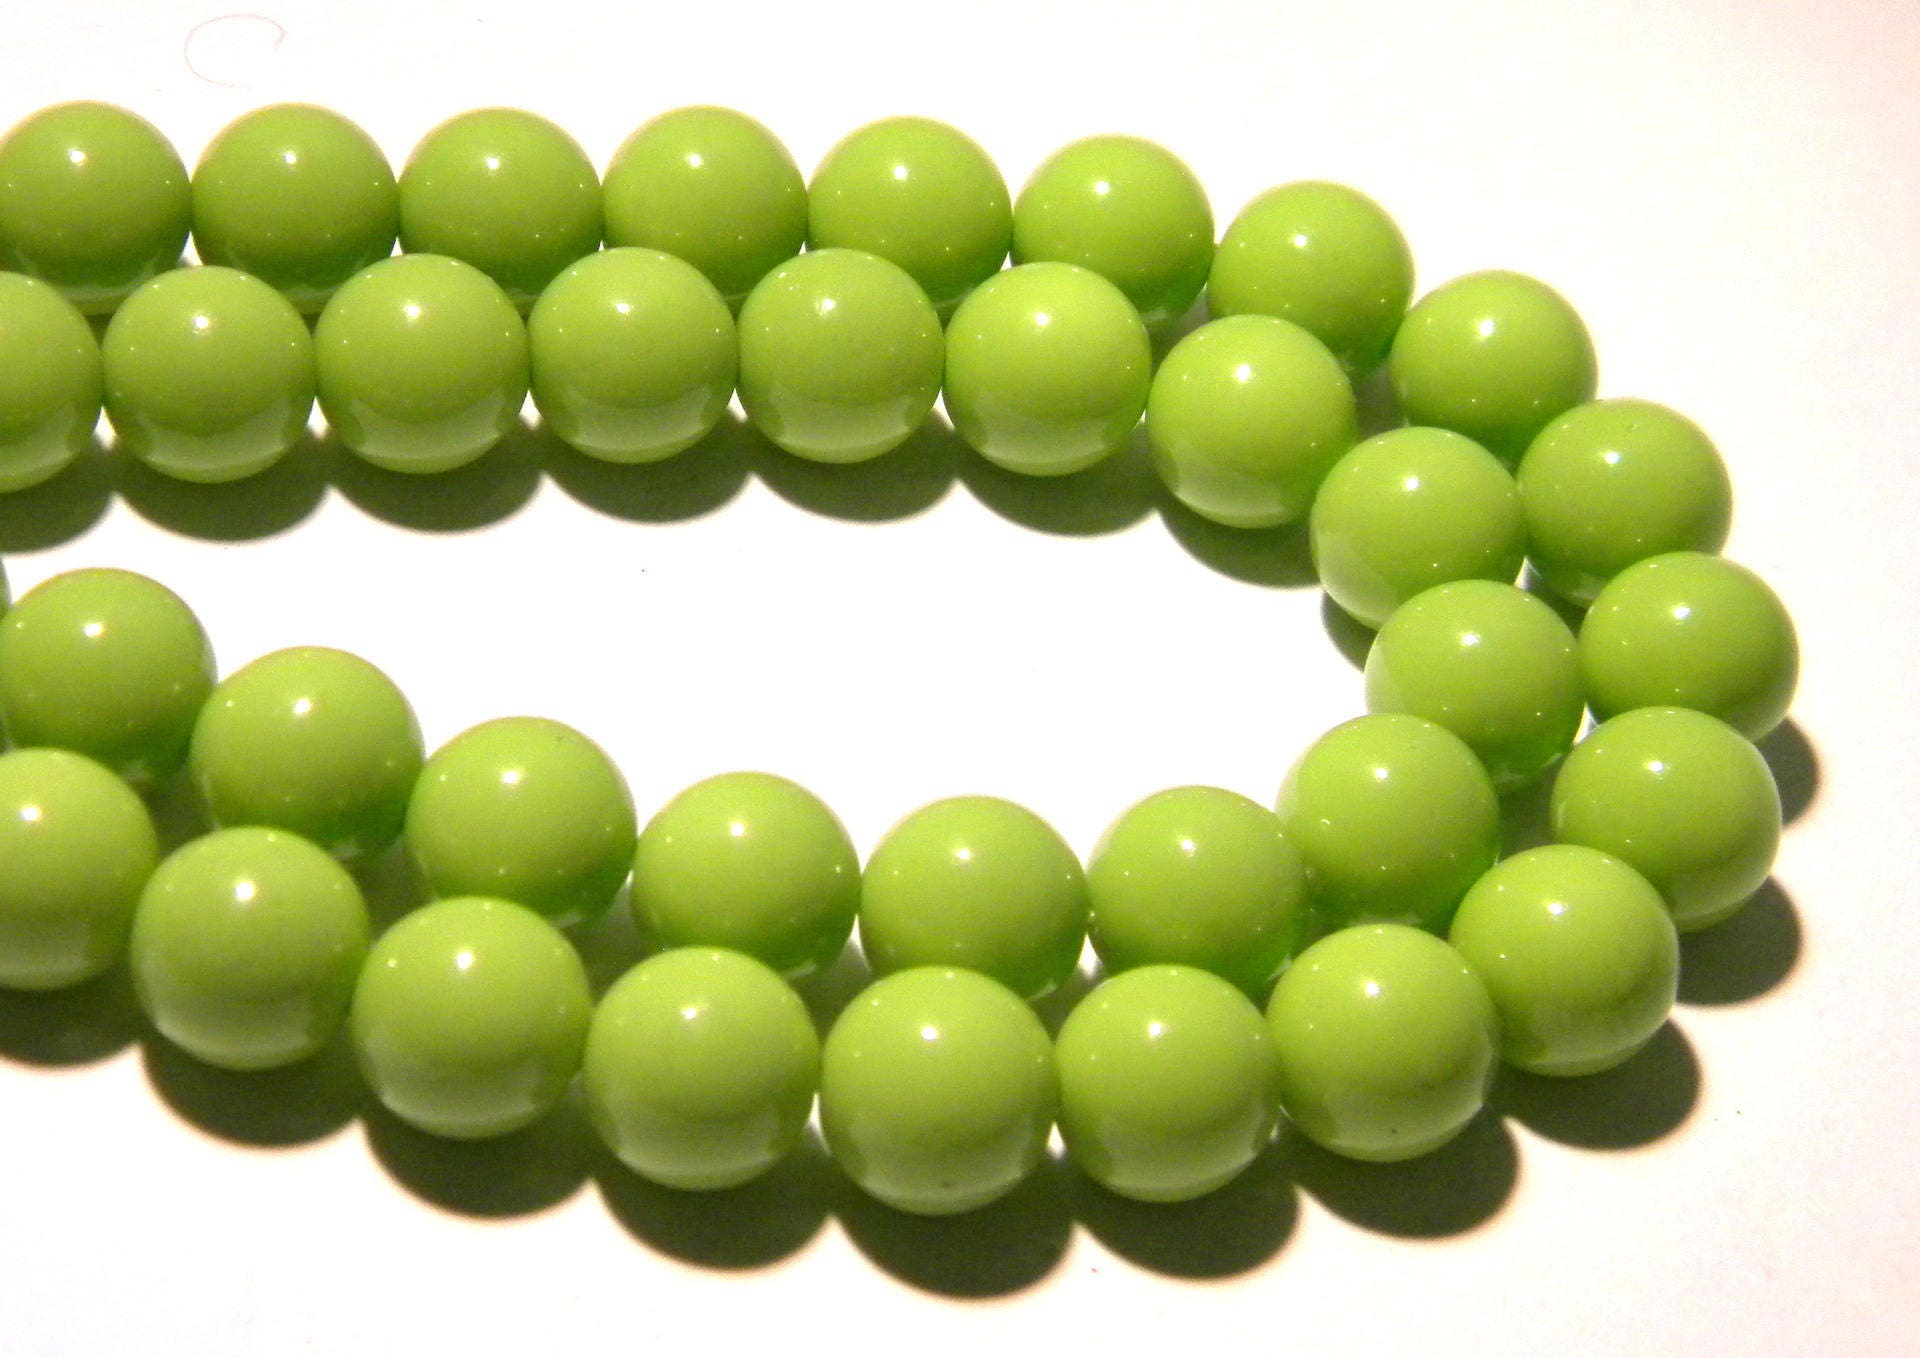 smooth and shiny-green bright anise-K57-3 20 beads cooked glass-10 mm